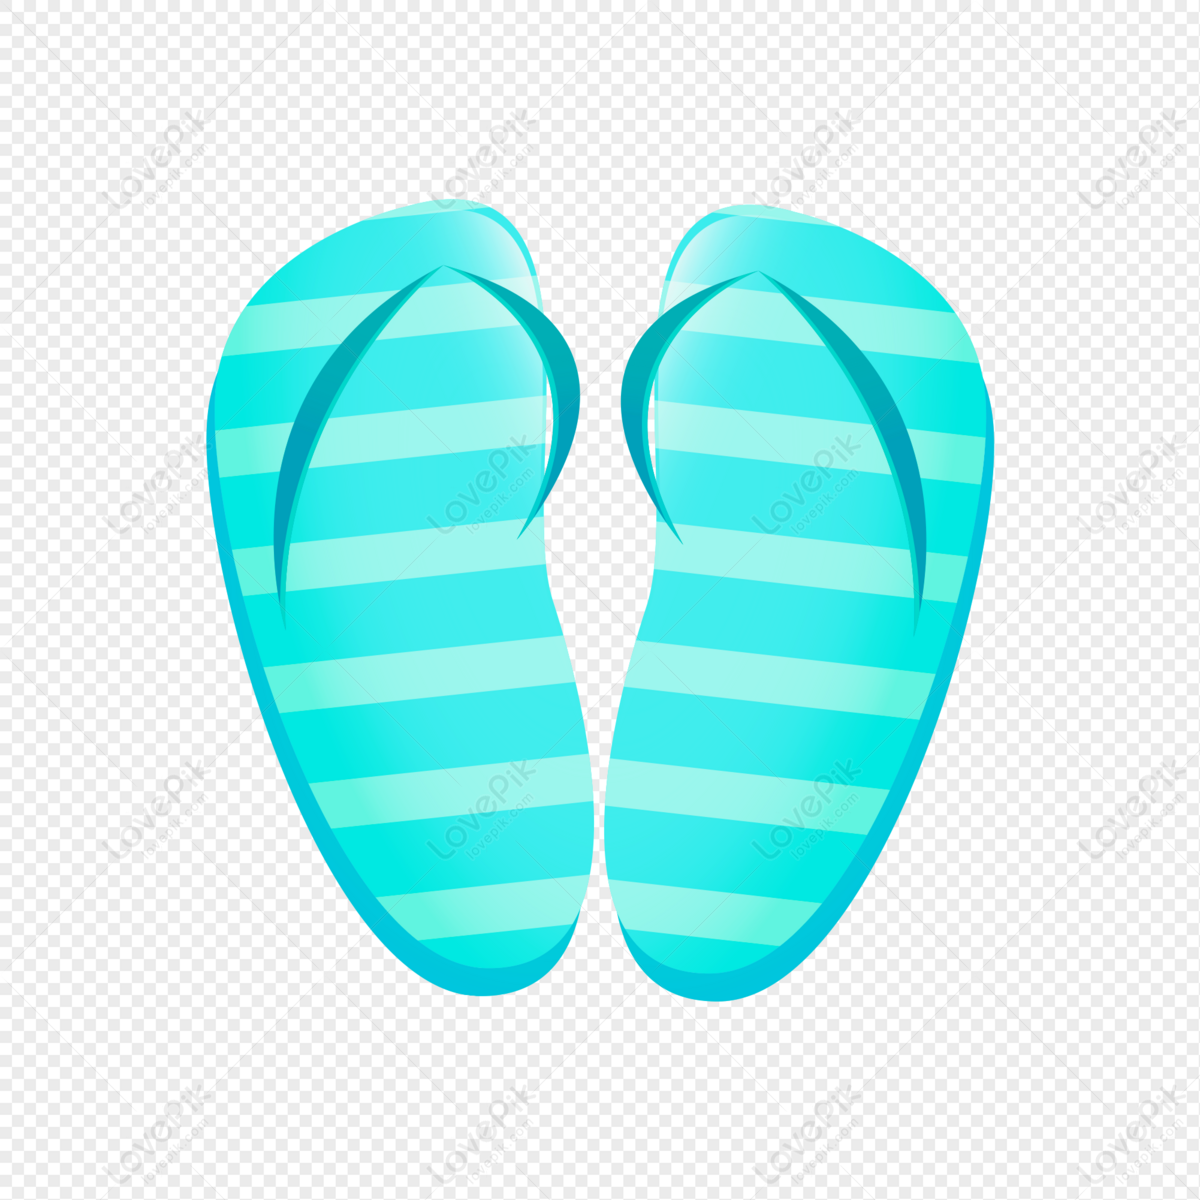 Green Slippers PNG Image Free Download And Clipart Image For Free ...